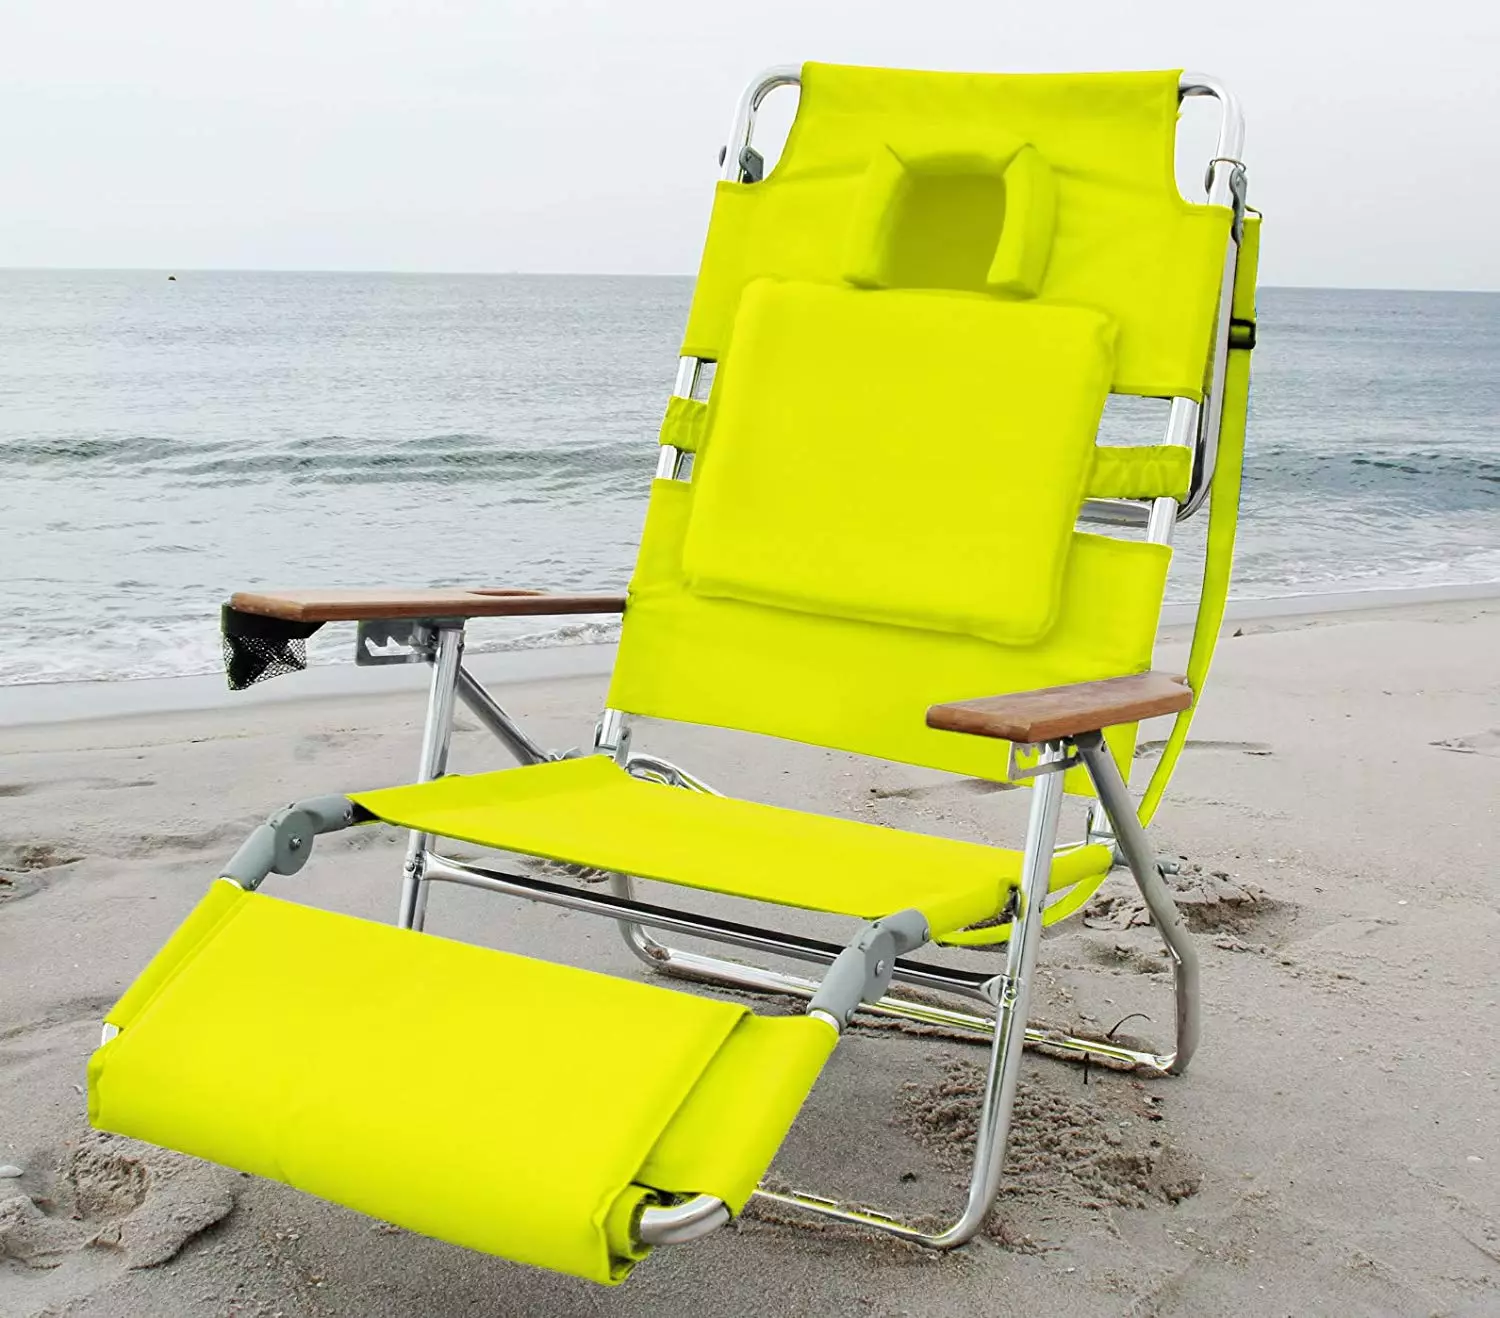 Everyone on the beach will be green with envy if you buy this from Amazon or eBay.